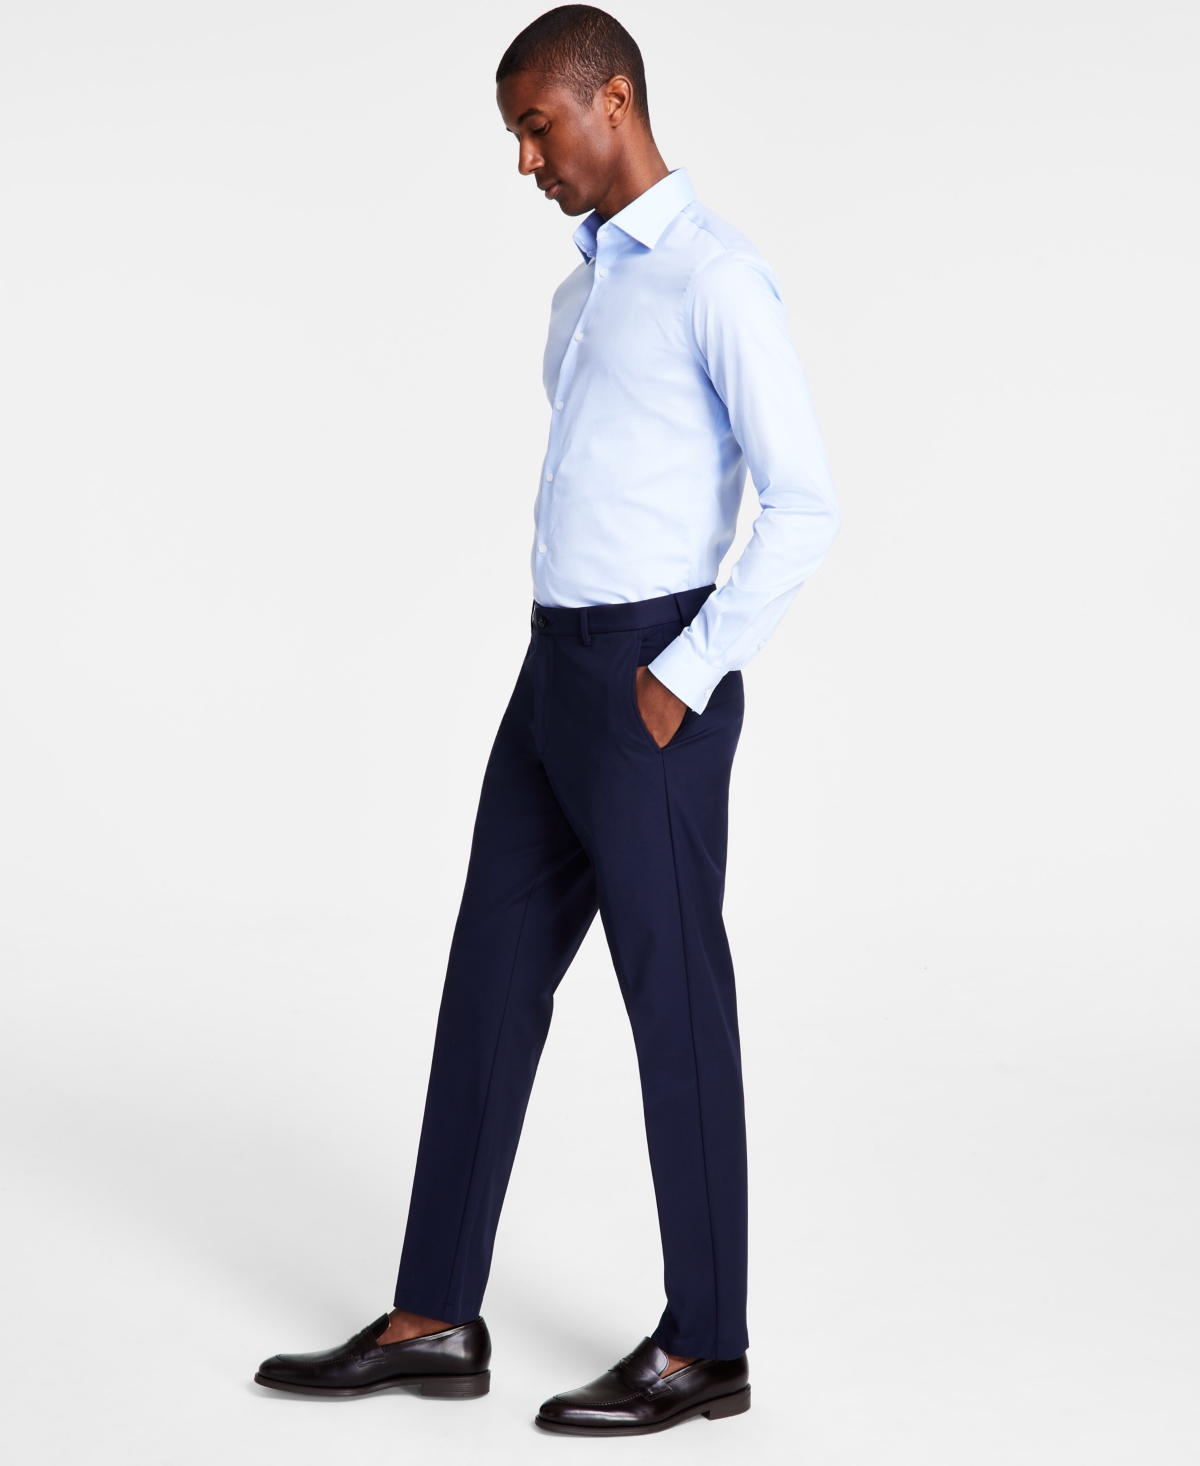 Michael Kors Men's Classic Fit Cotton Stretch Performance Pants In Navy